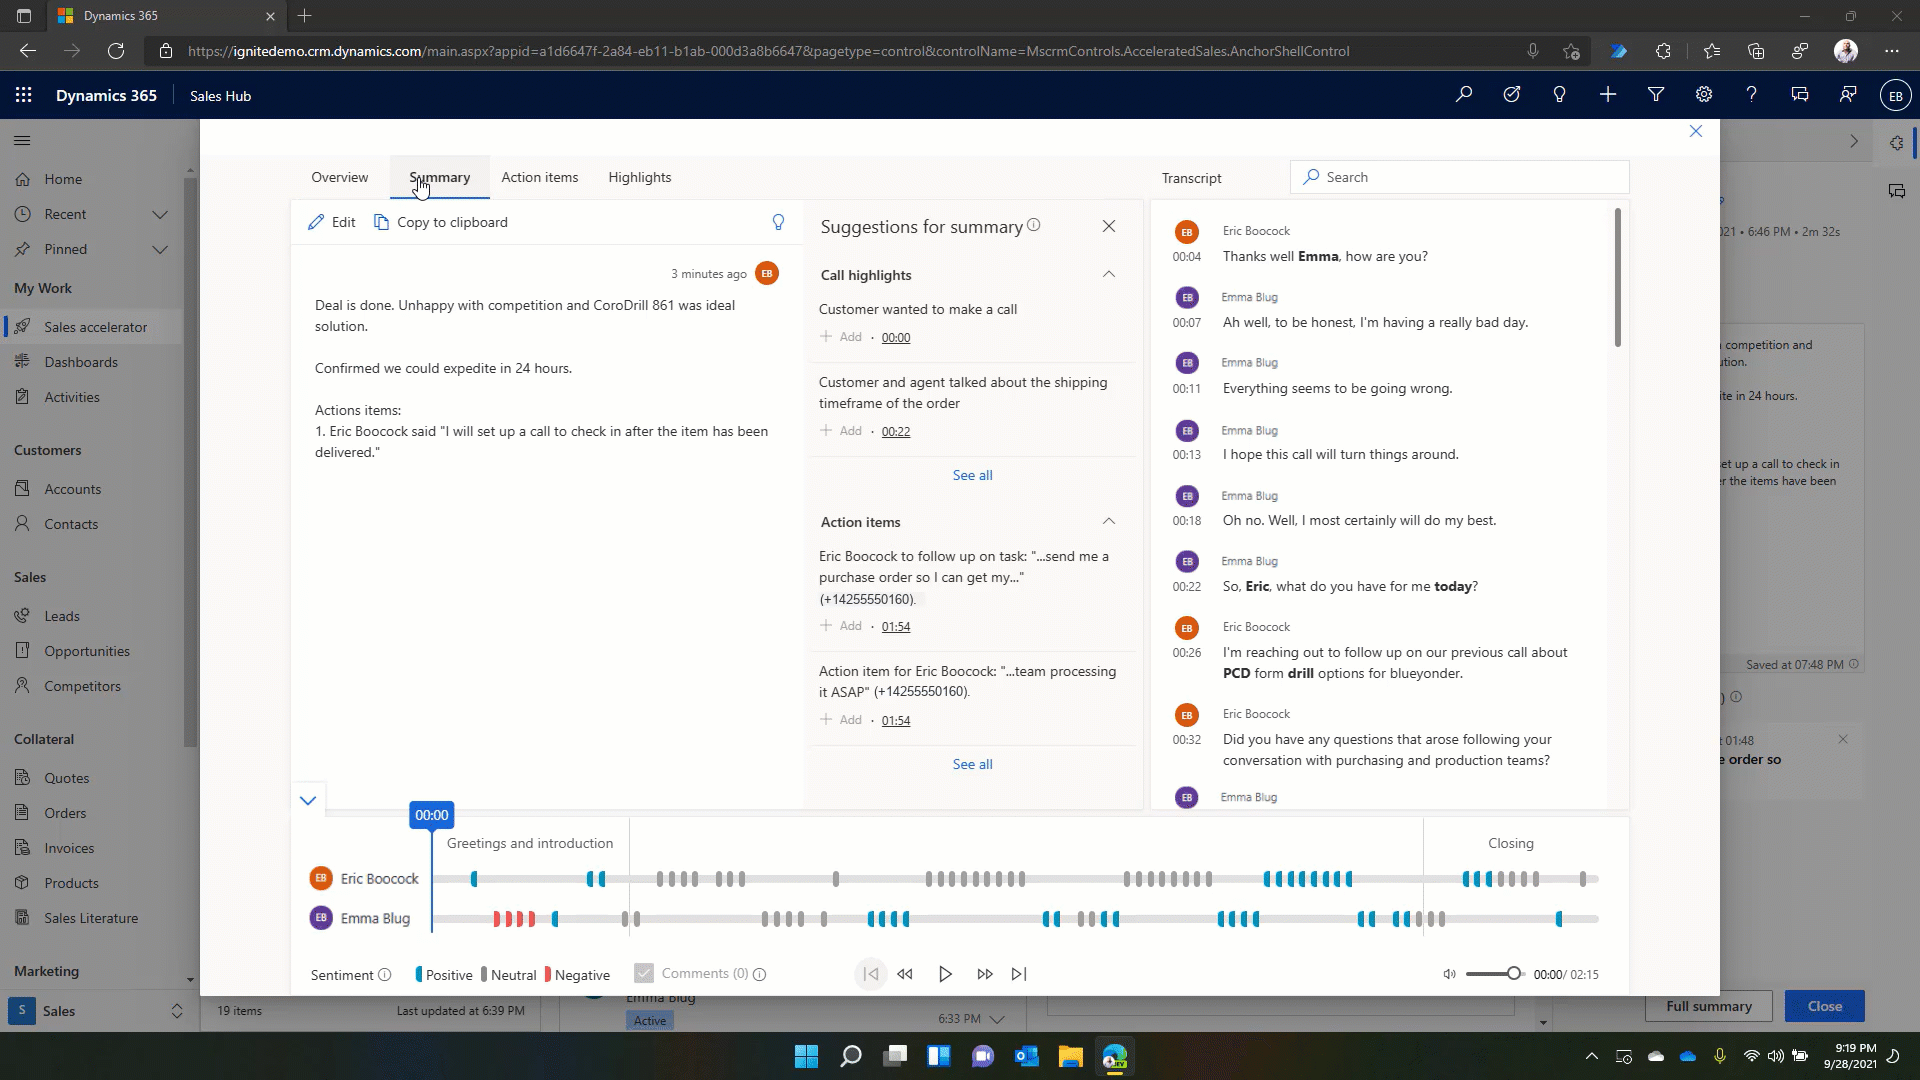 Animated image of Dynamics 365 demonstrating post call summary, highlights and suggested actions.